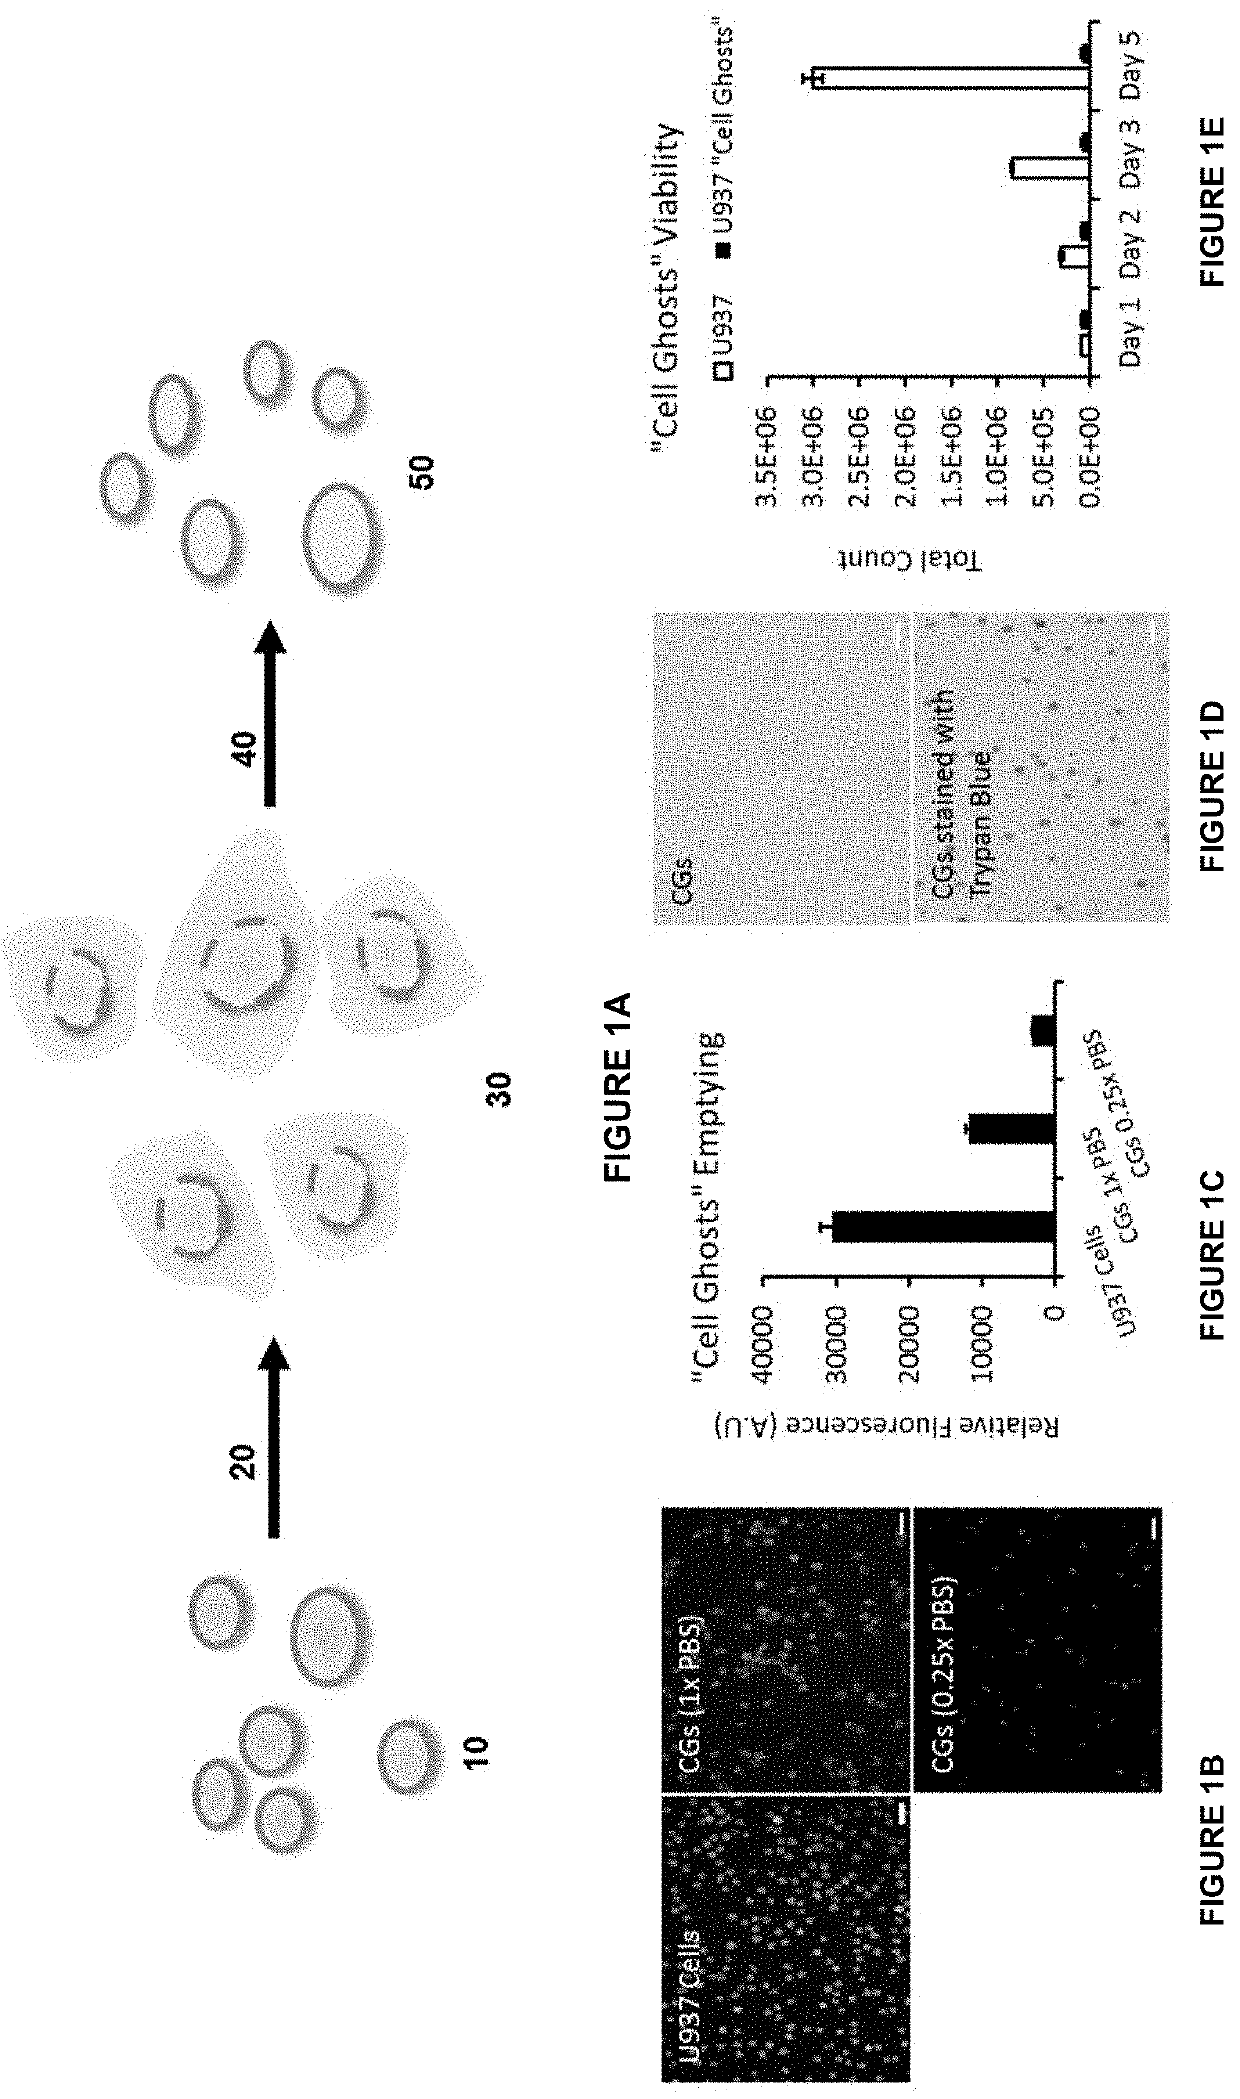 Biomolecular composites comprising modified cell ghosts